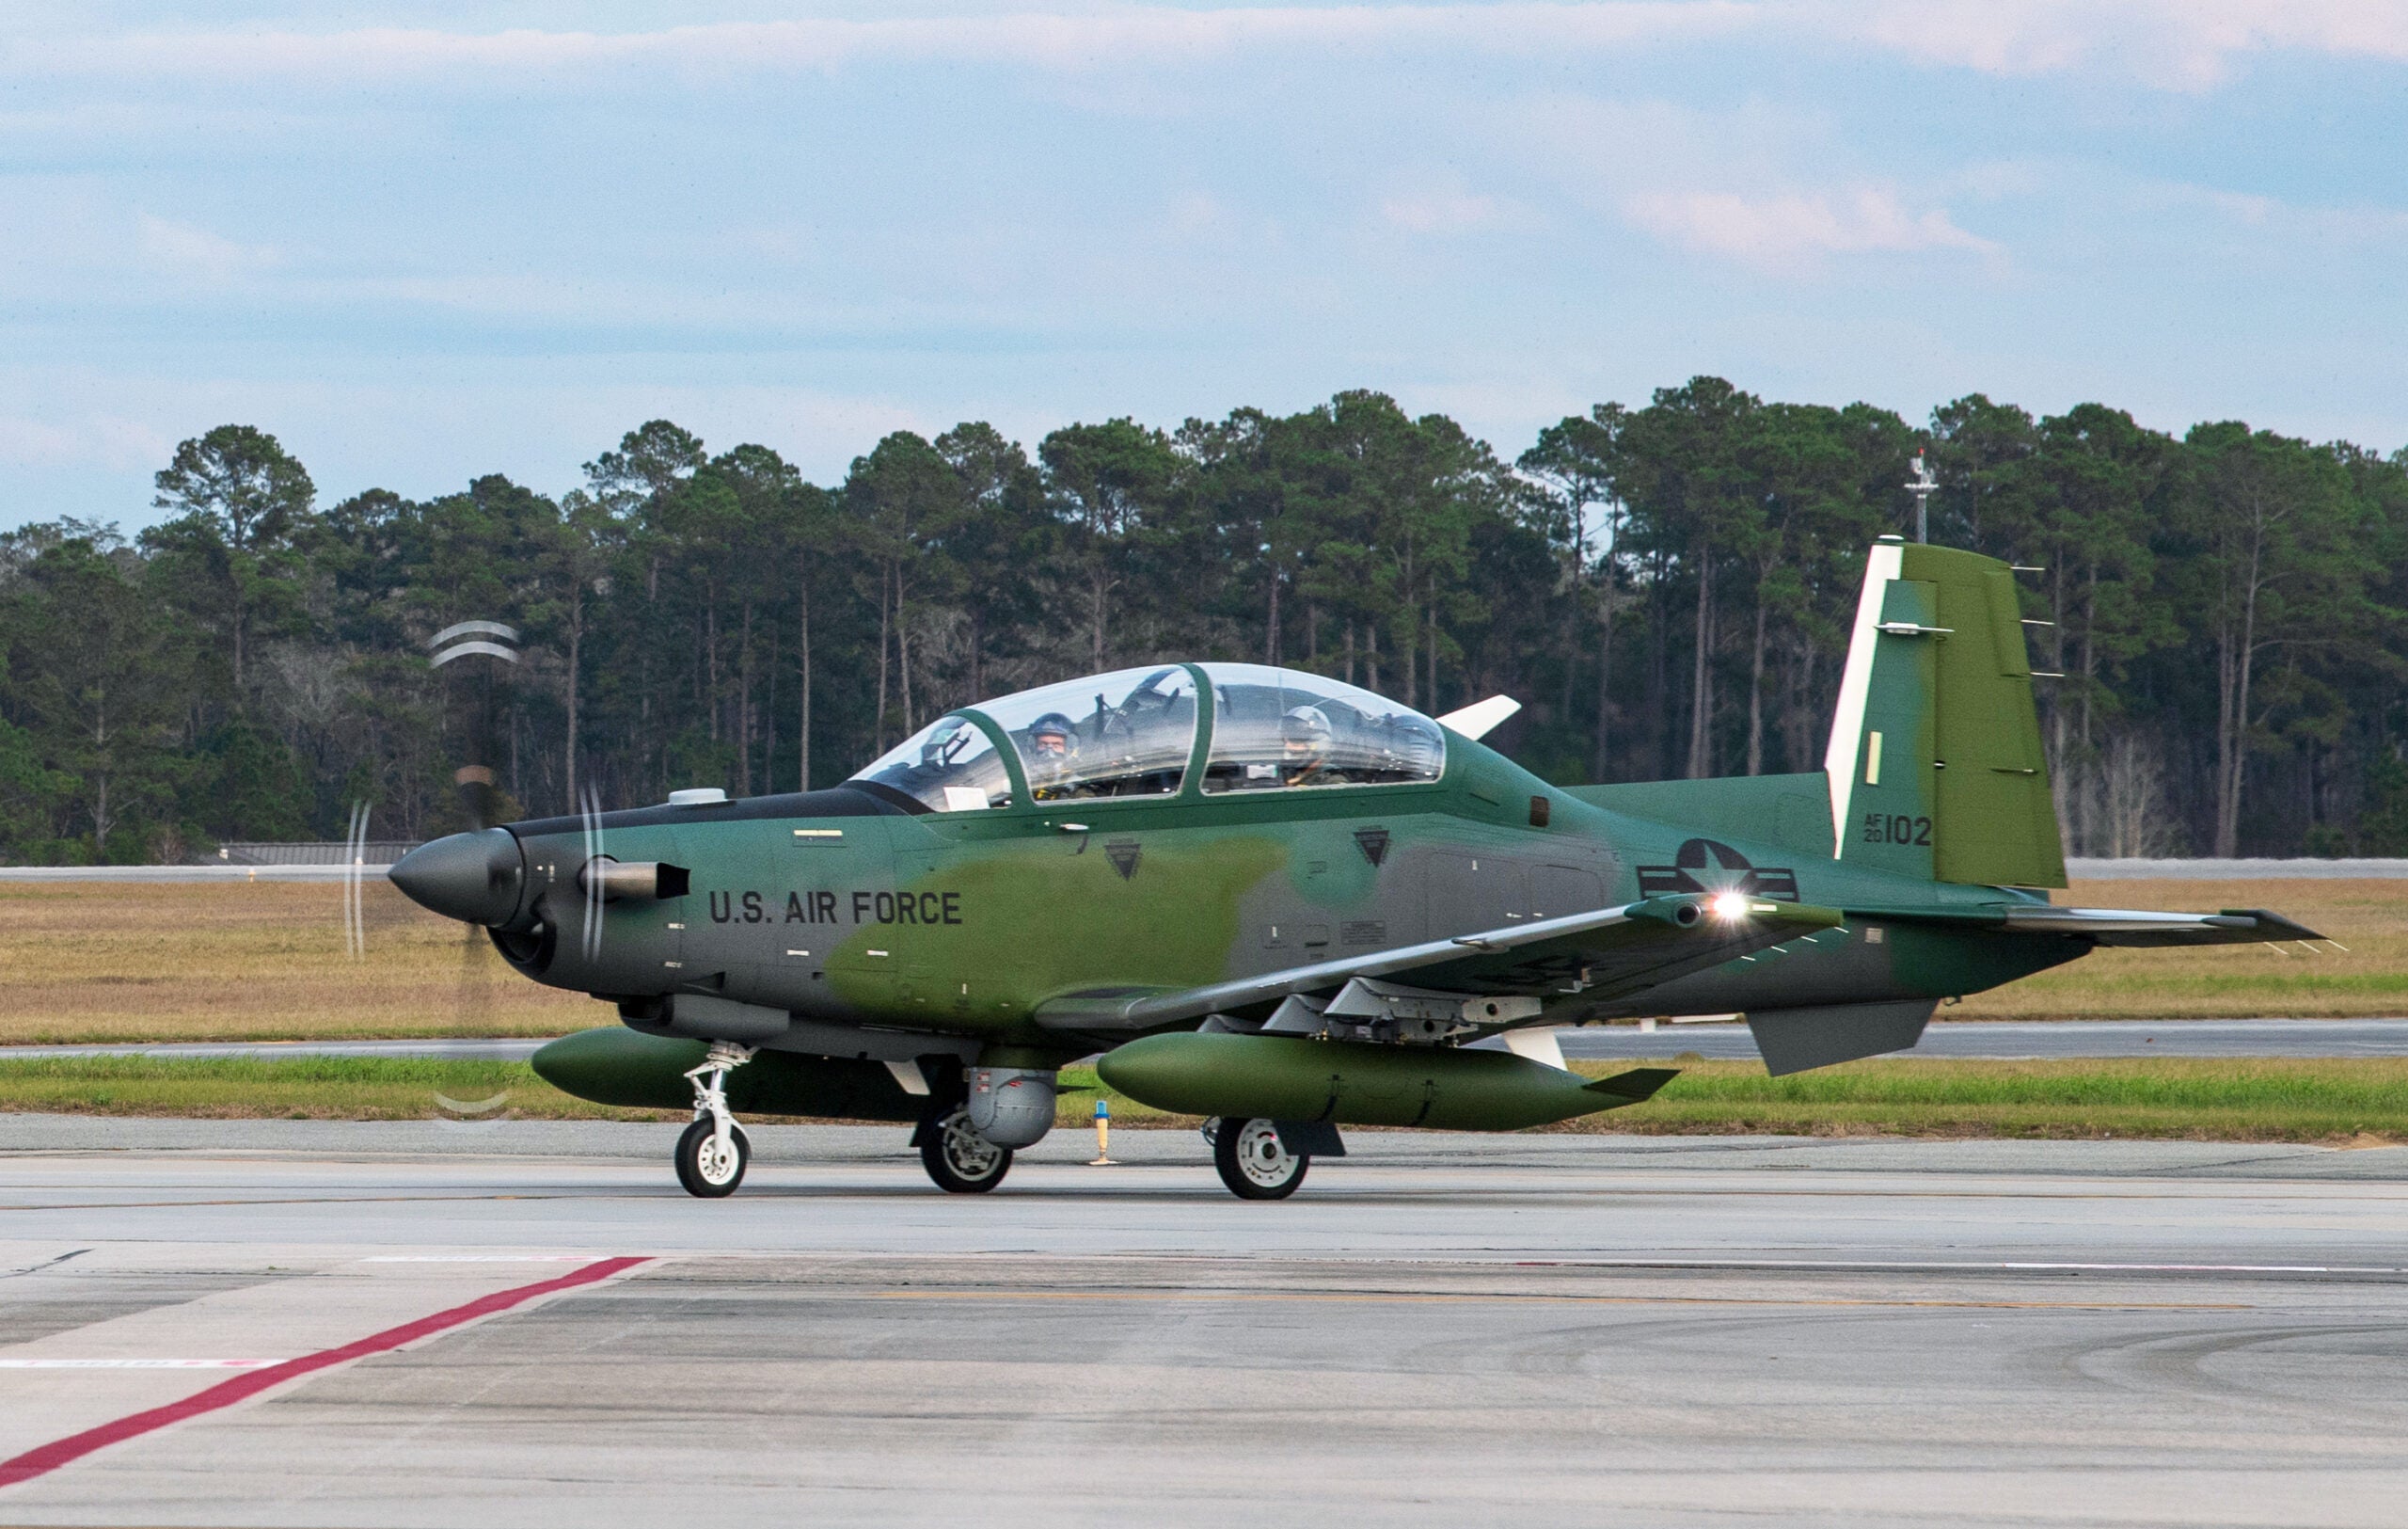 A U.S. Air Force AT-6E Wolverine taxis on the flightline during its arrival at Moody Air Force, Georgia, Jan. 12, 2022. Pilots from the 81st Fighter Squadron, who are on loan to the 23rd Wing, will be flying the AT-6 aircraft alongside partner nation personnel. They will be working together to build the capacity and capability of the U.S. partner nations, enhancing the ability to seamlessly work together and enabling the successes of any future operation. (U.S. Air Force photo by Andrea Jenkins)